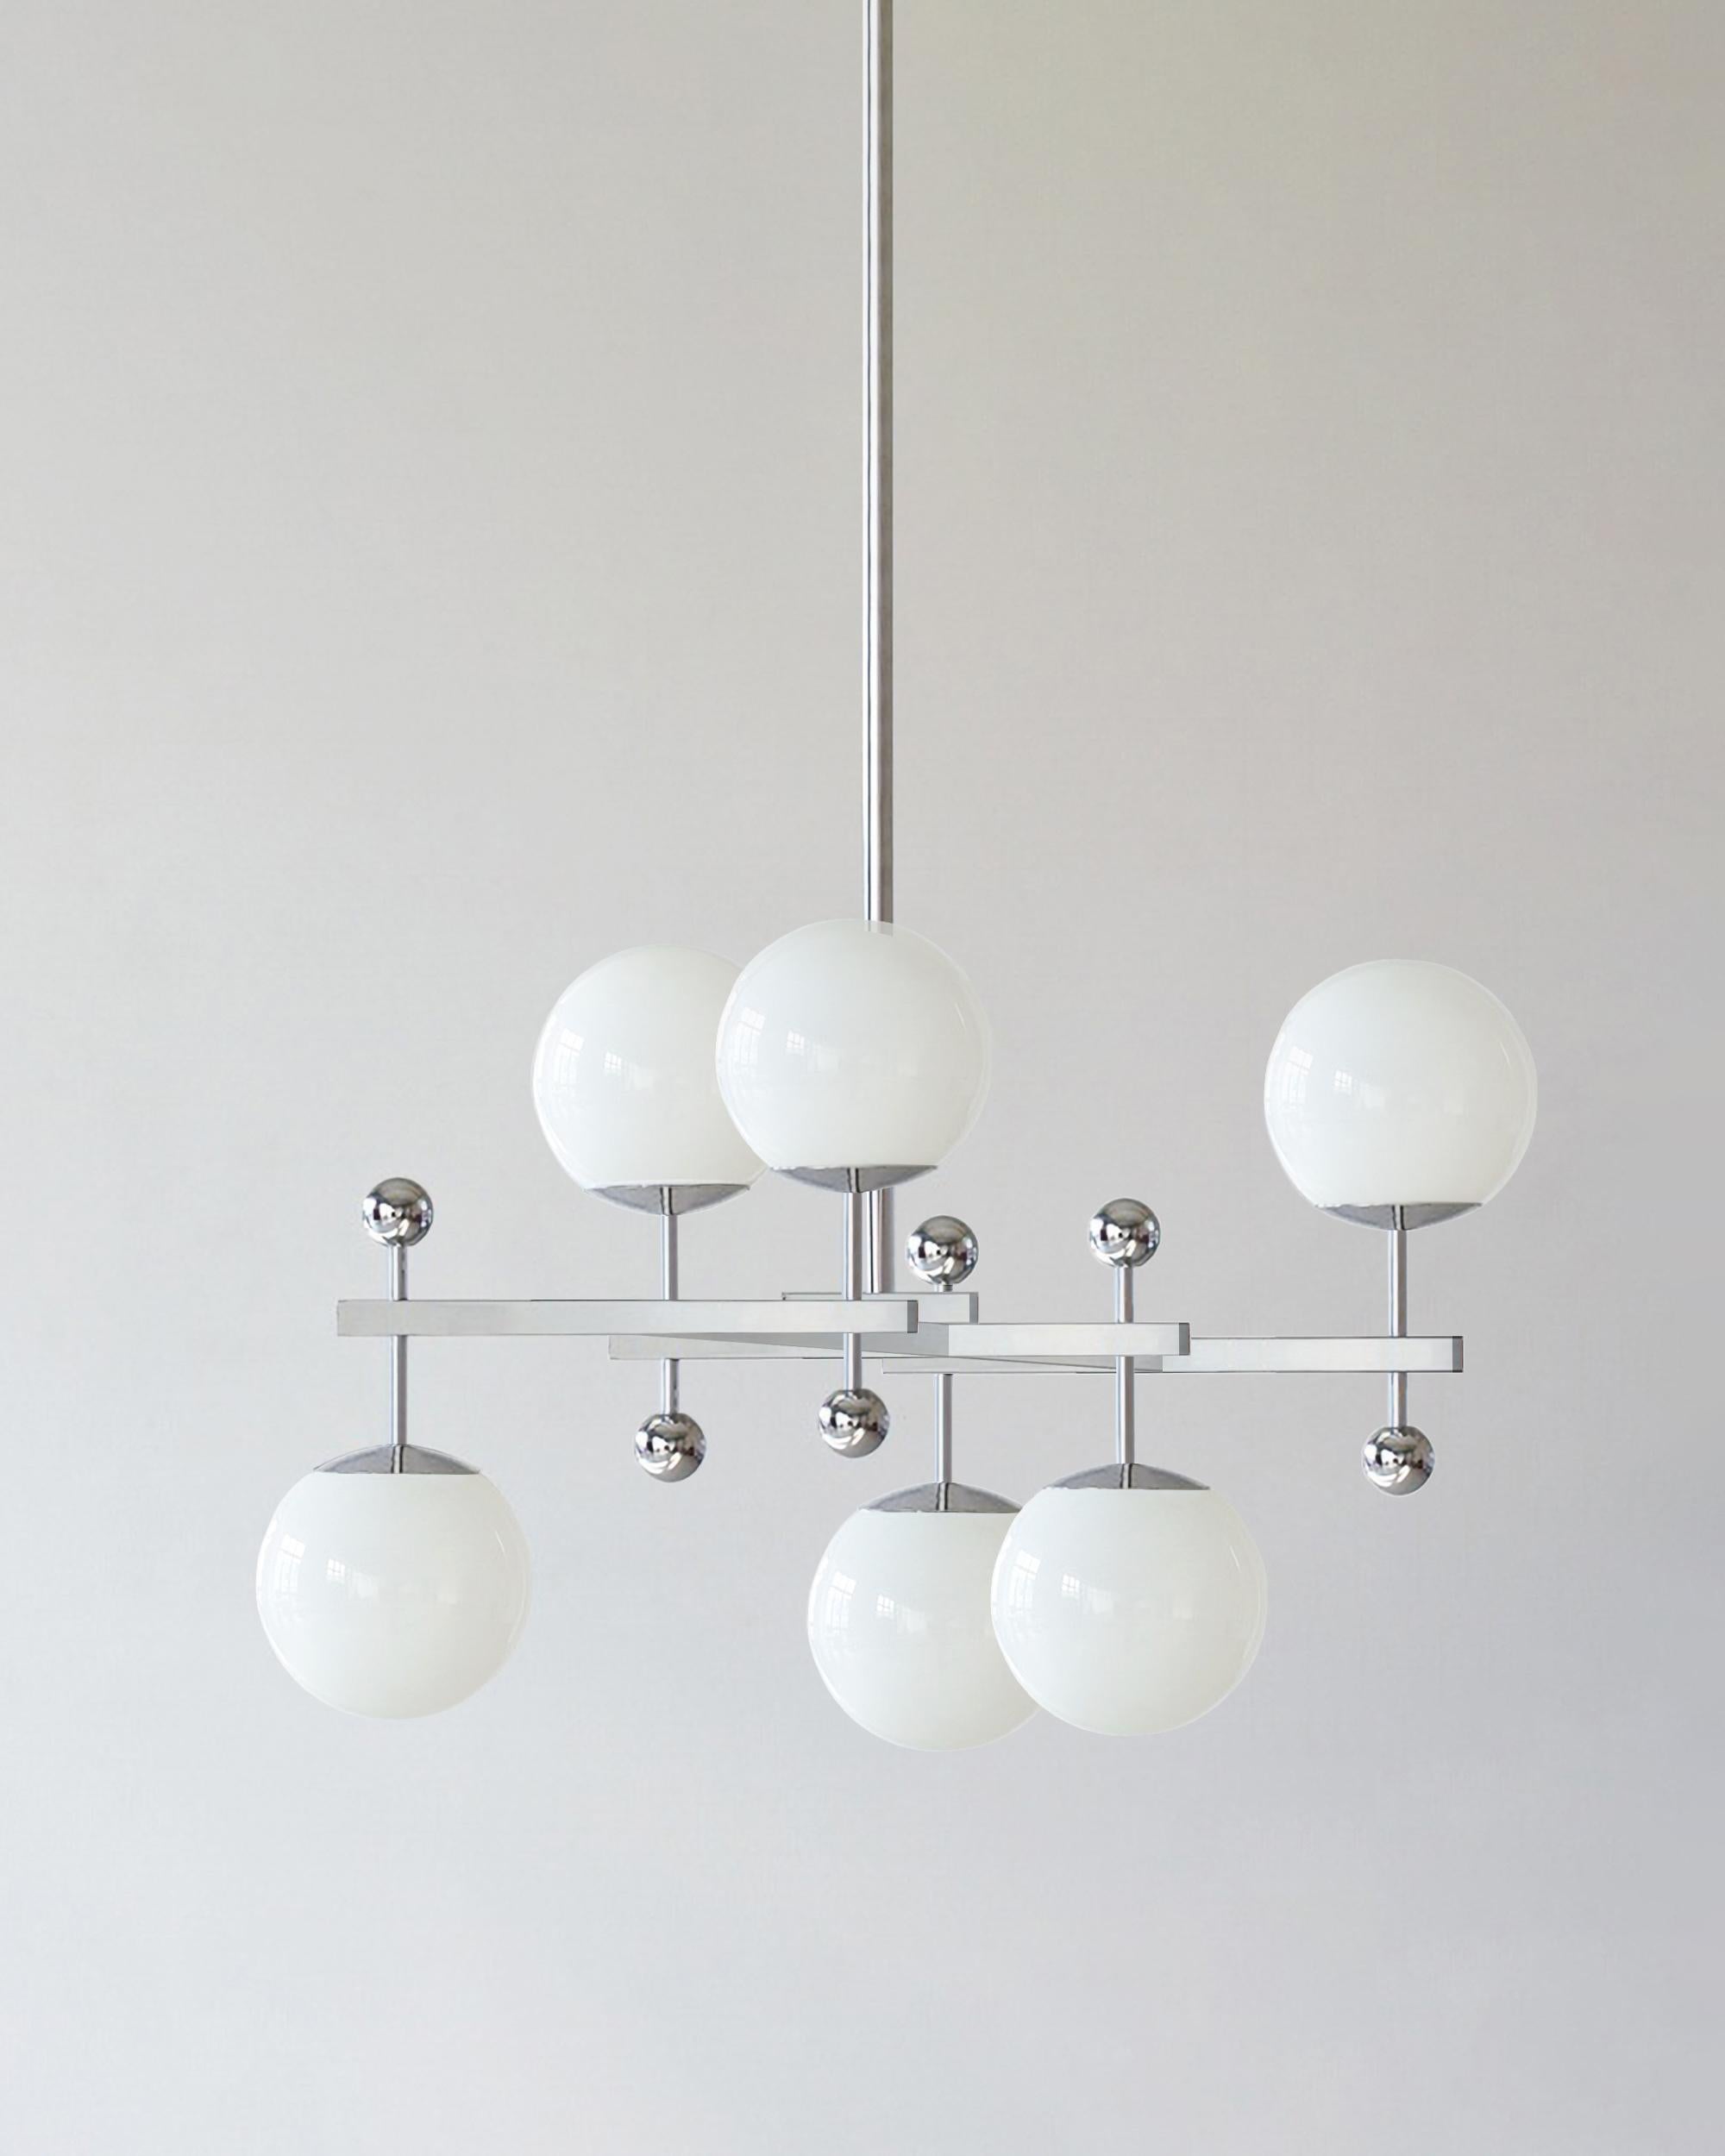 Bespoke modernist pendant light, nickel plated brass with 6 opaline glass bulbs.
Also available with 2, 4, 6  or 8 opaline glass bulbs.